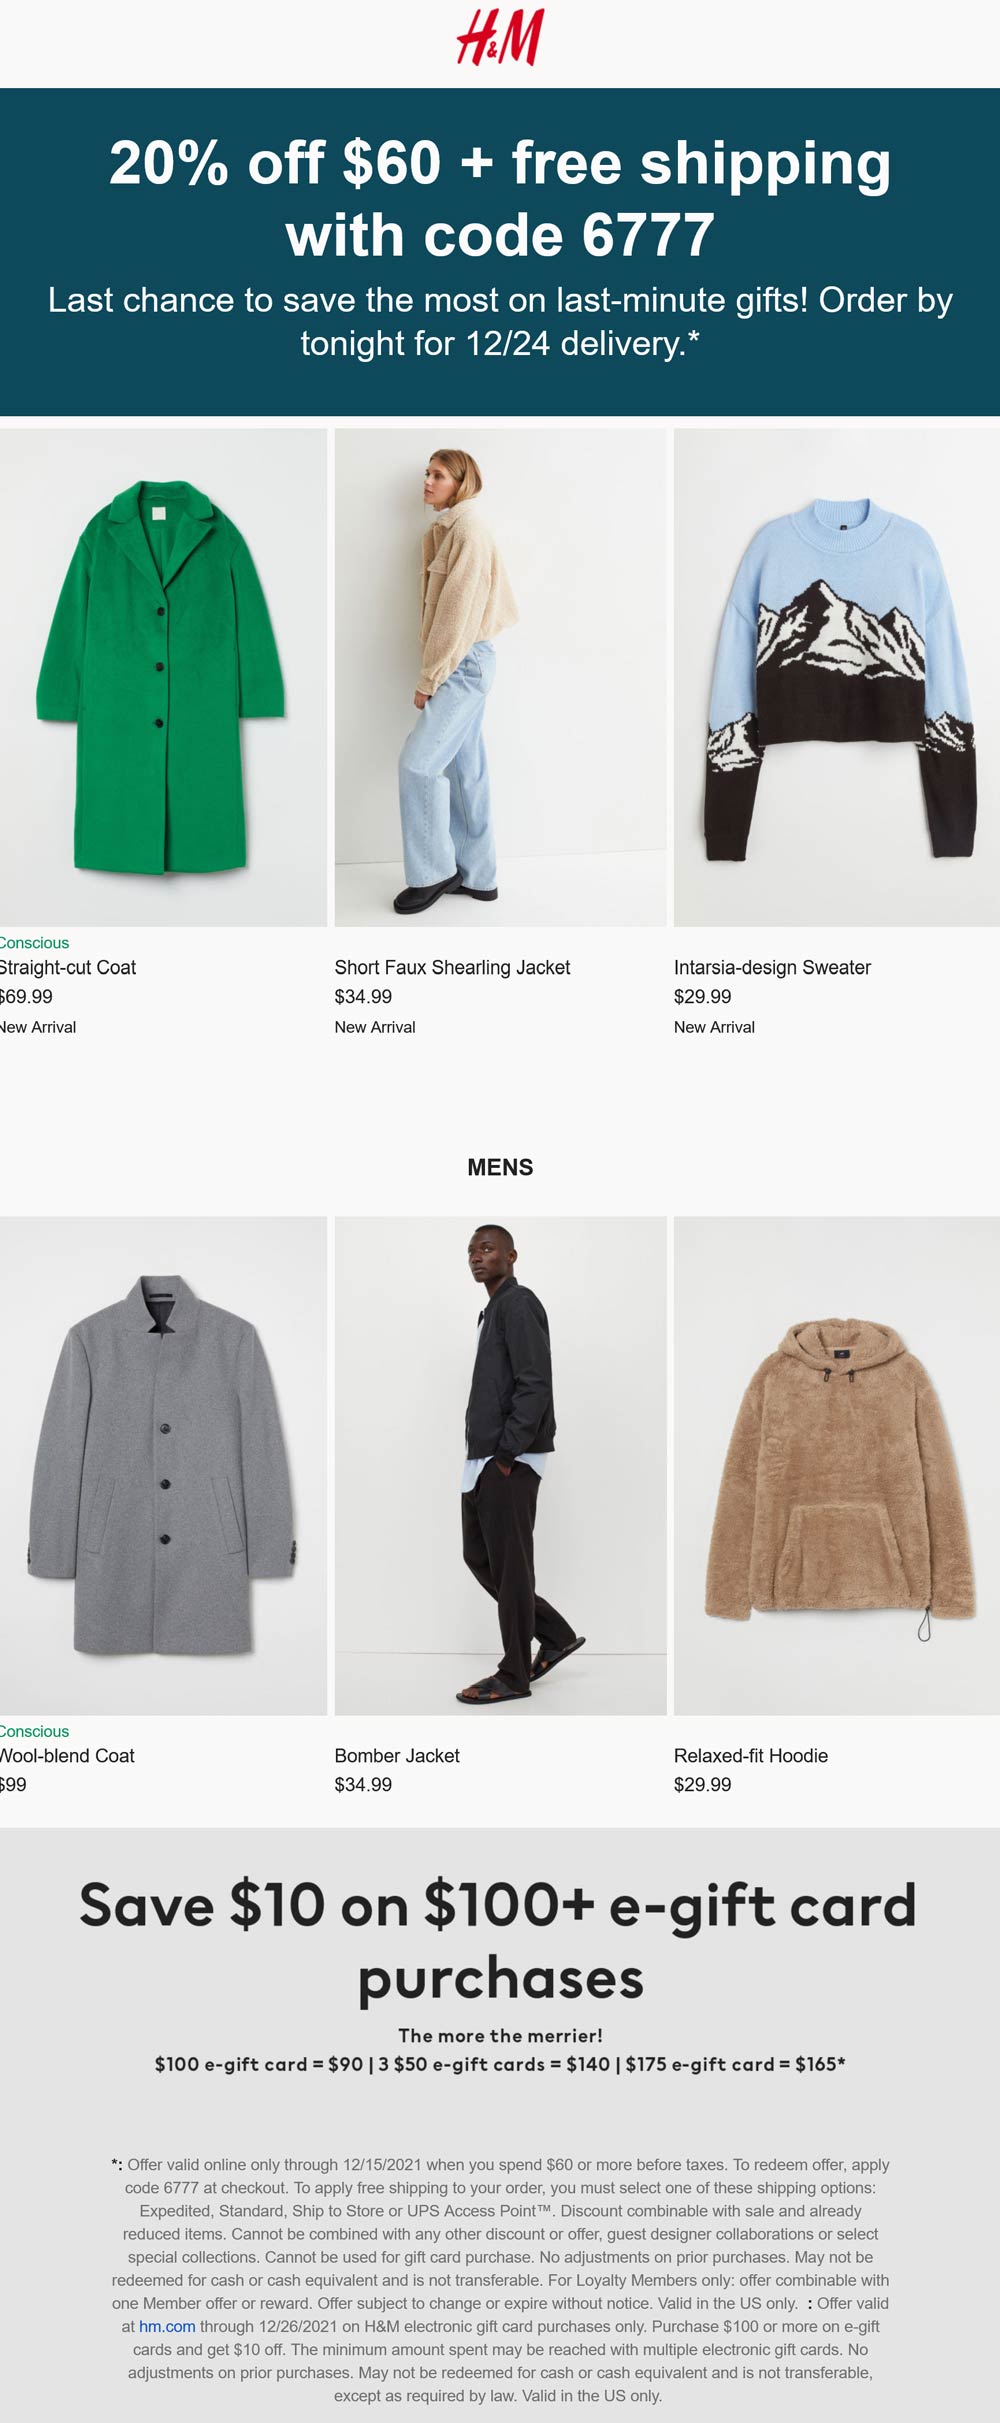 H&M stores Coupon  20% off $60 online today at H&M via promo code 6777 #hm 